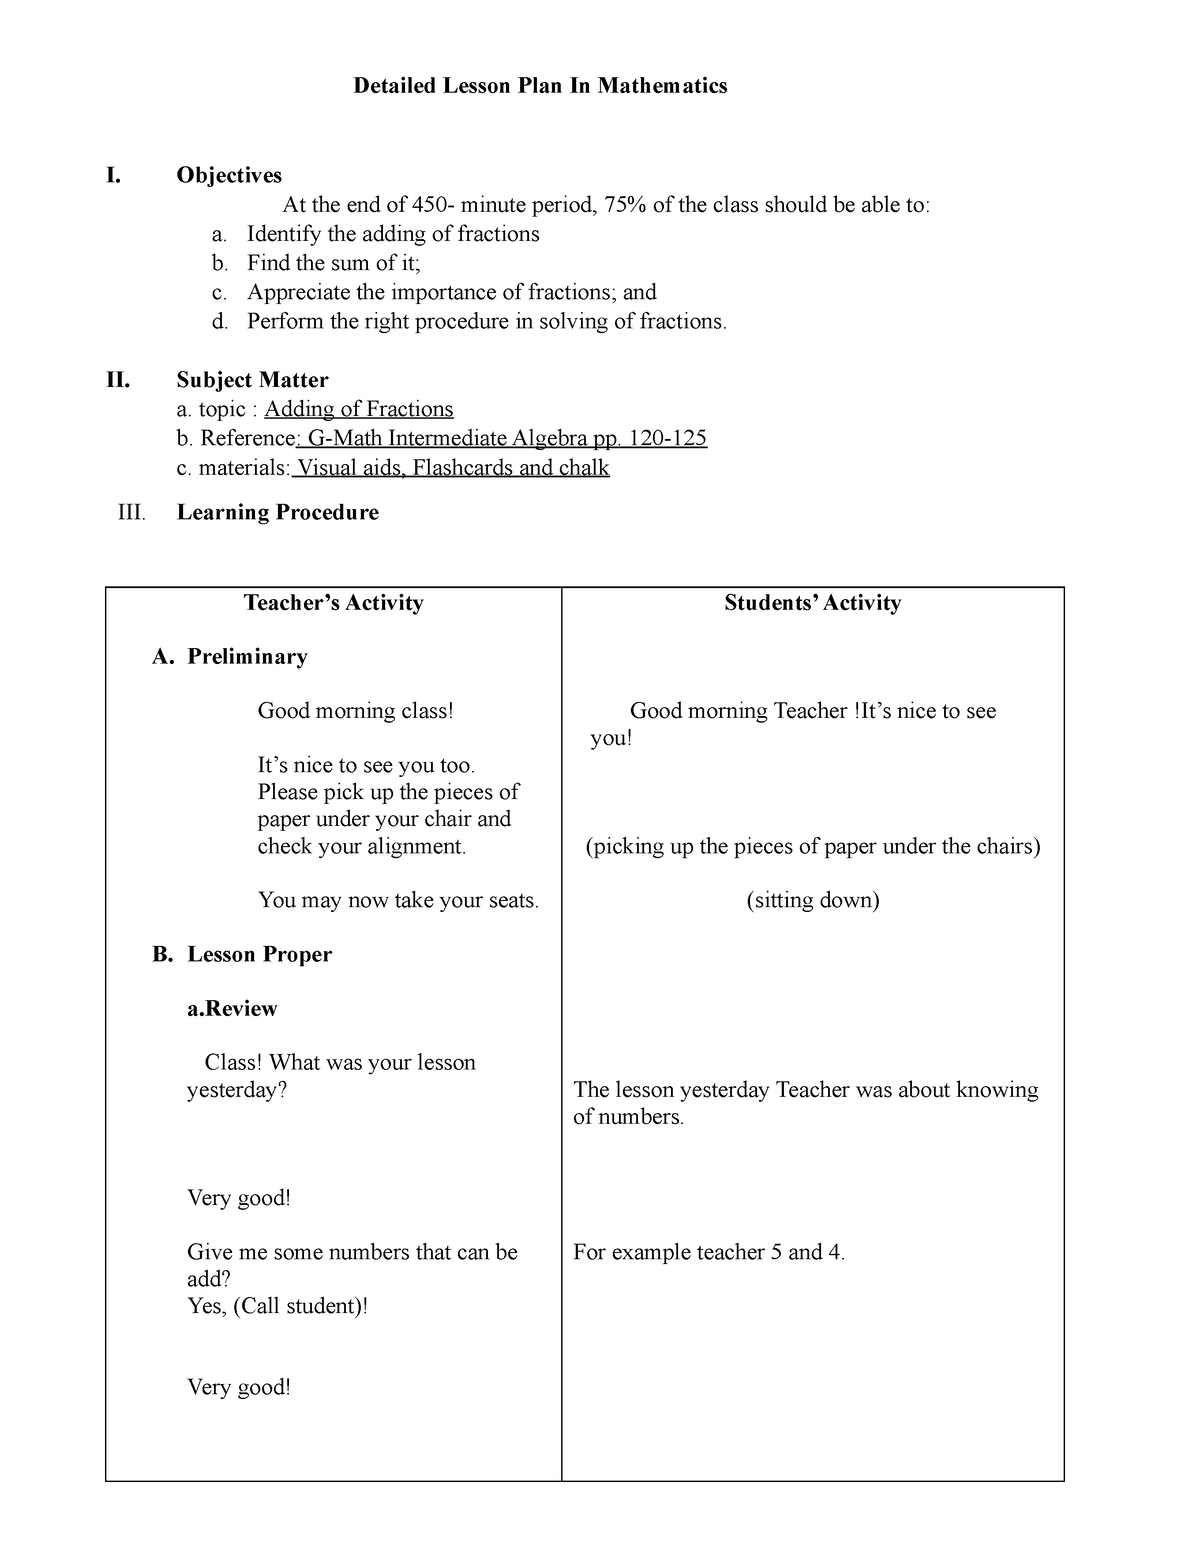 Detailed Lesson Plan Addingoffractions MATH - Detailed Lesson Plan In ...